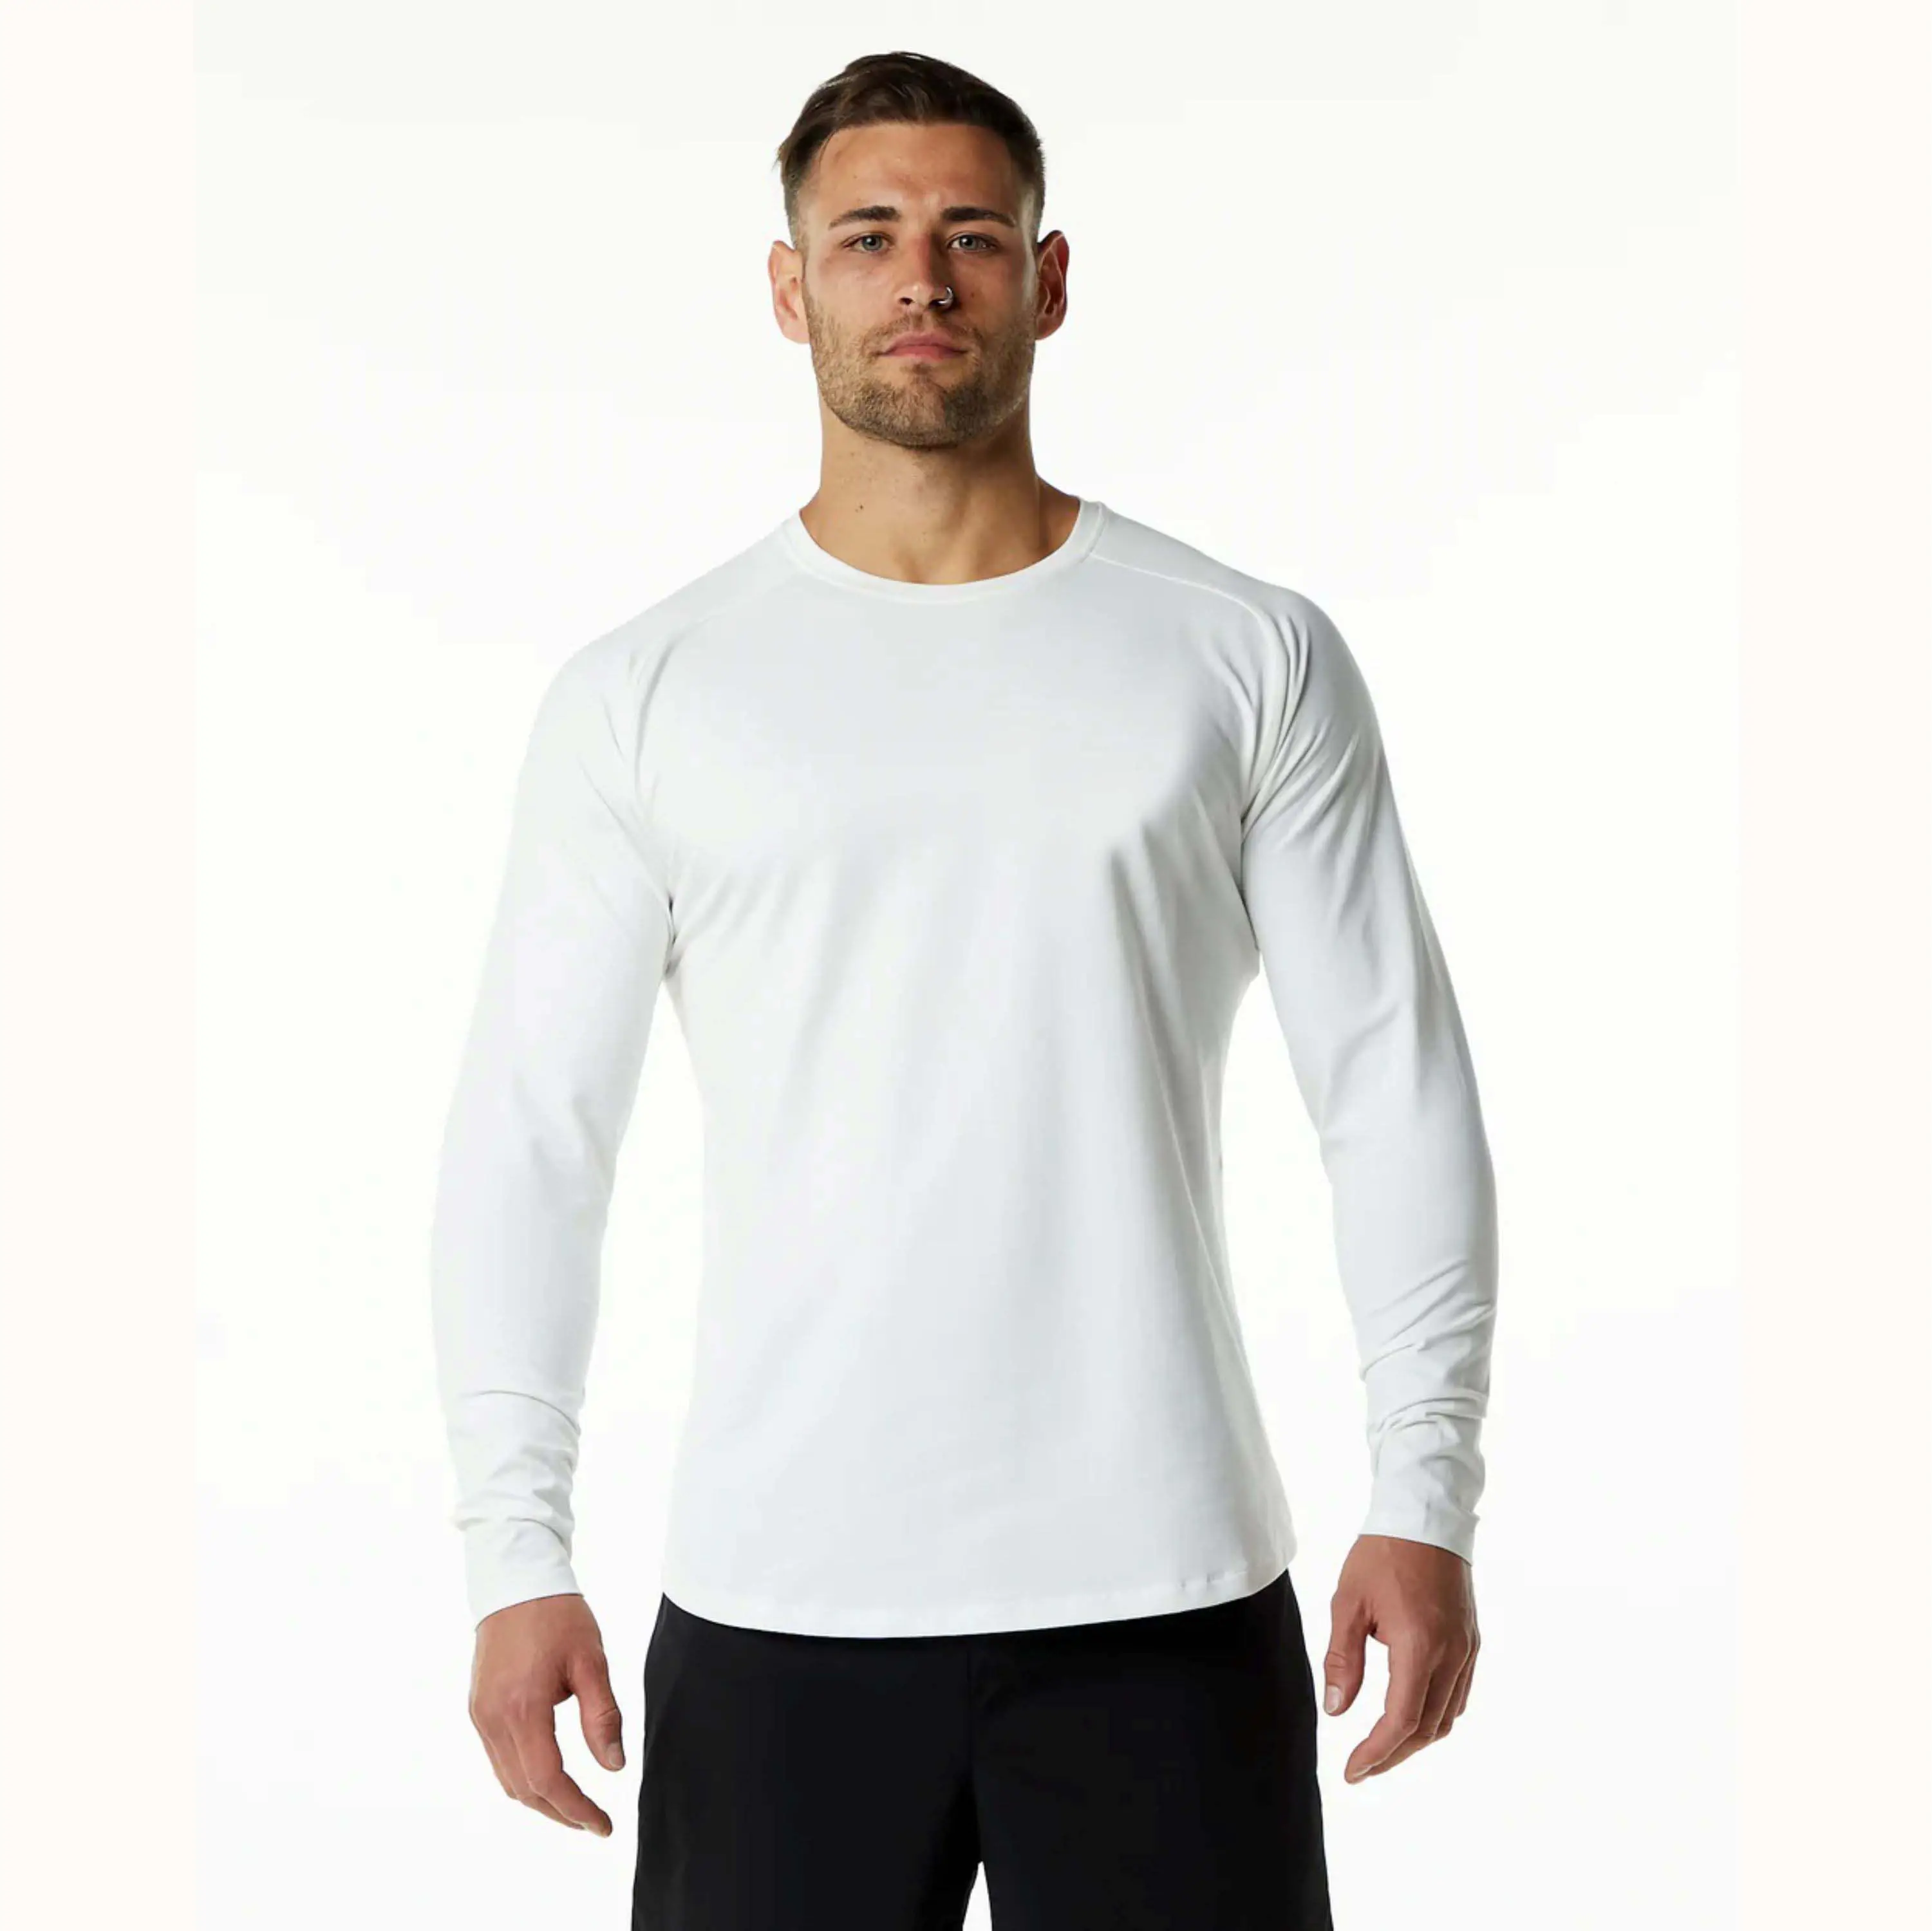 94% Cotton 6% Spandex Saddle Sleeve Cut Tapered Fit Crew Neck Scoop Hem White Mens Fitted Performance Long Sleeve T-Shirt